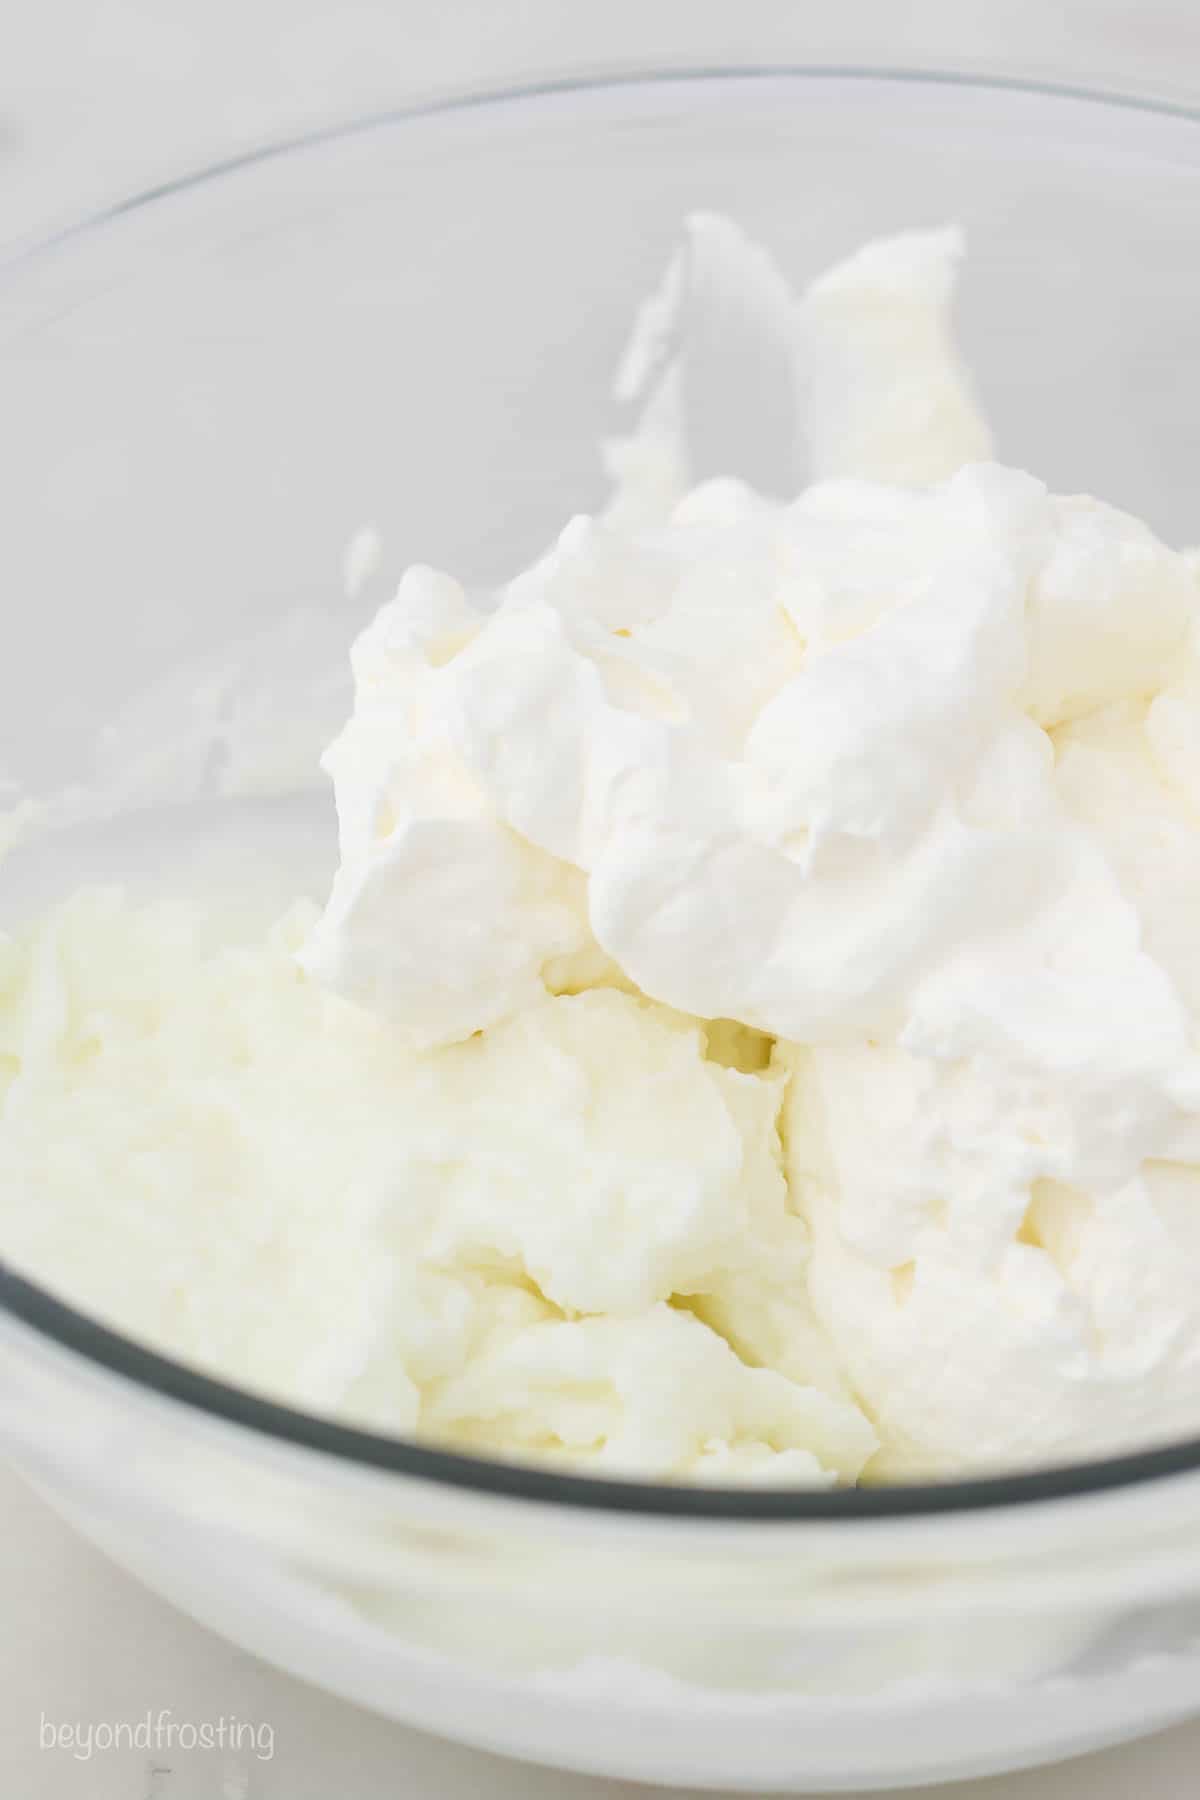 homemade whipped being mixed into pudding